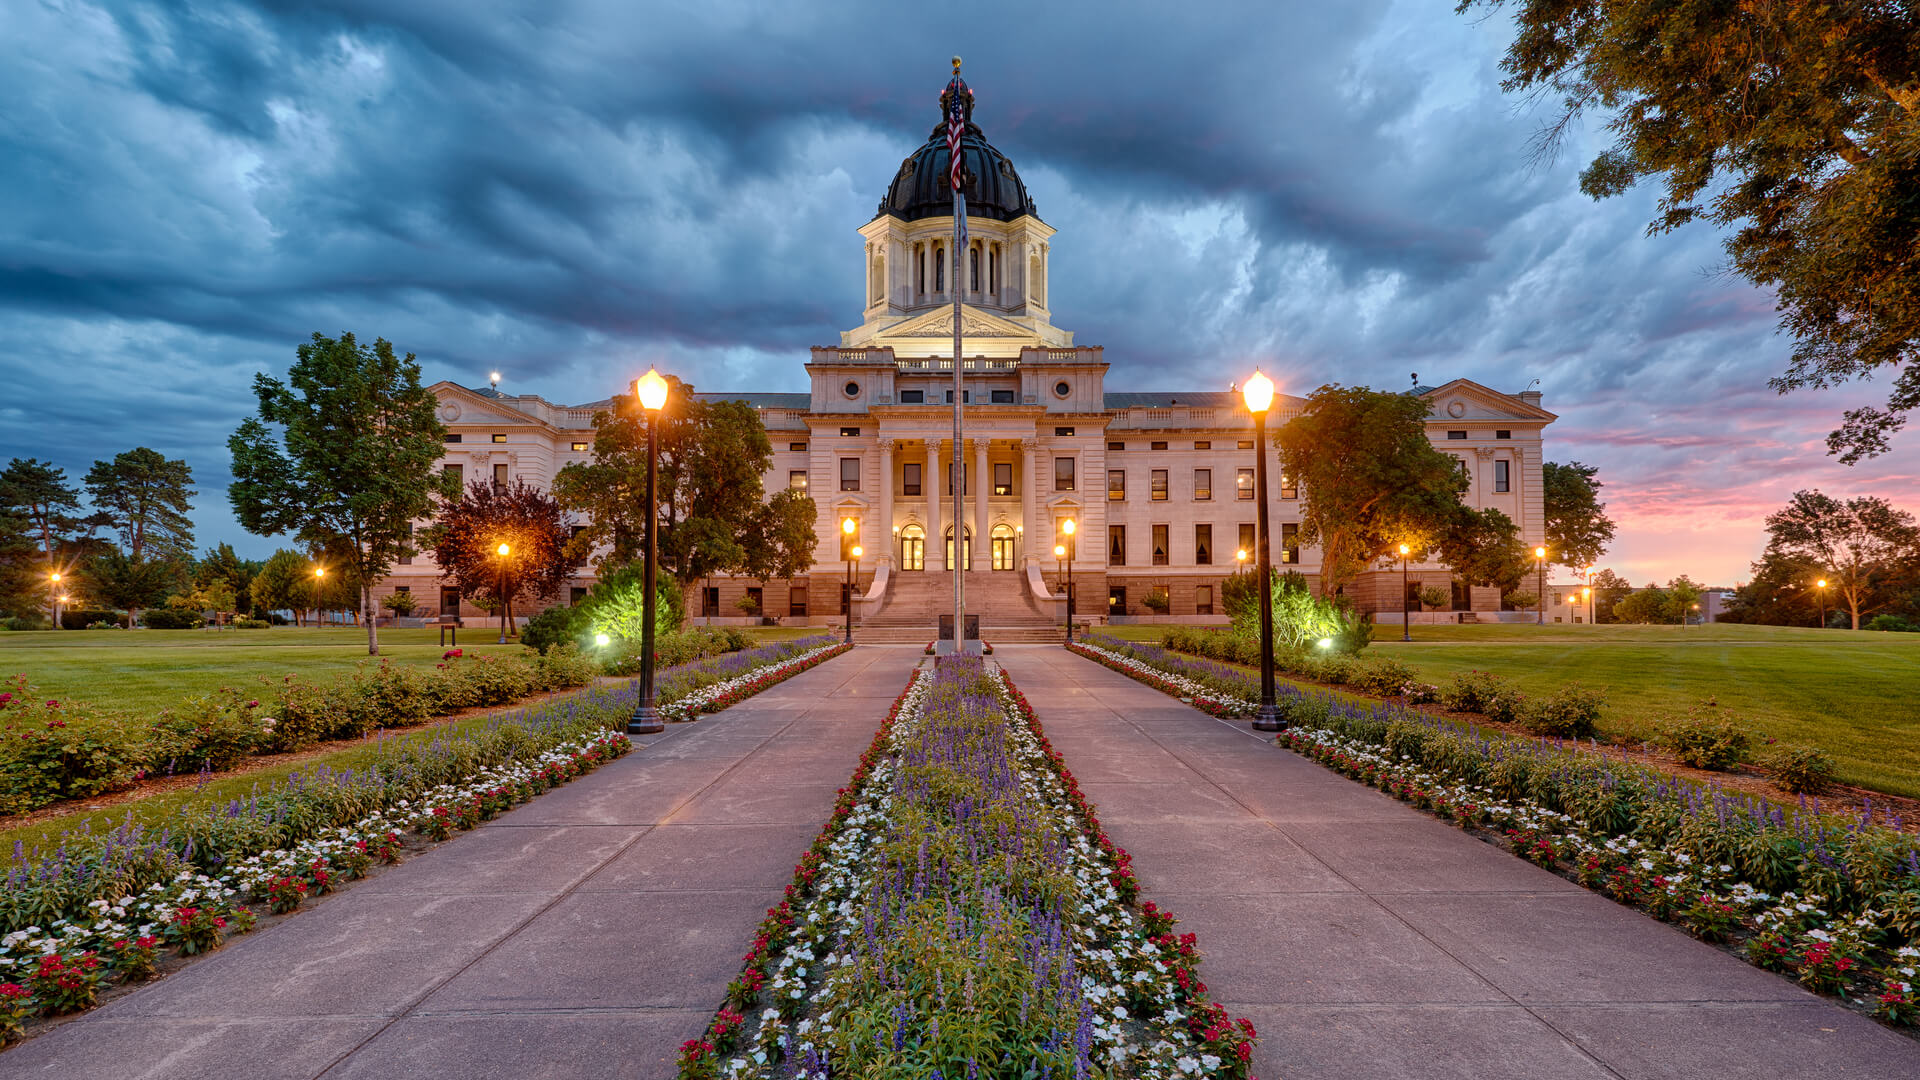 South Dakota State Capitol building in Pierre, South Dakota with a storm in the background